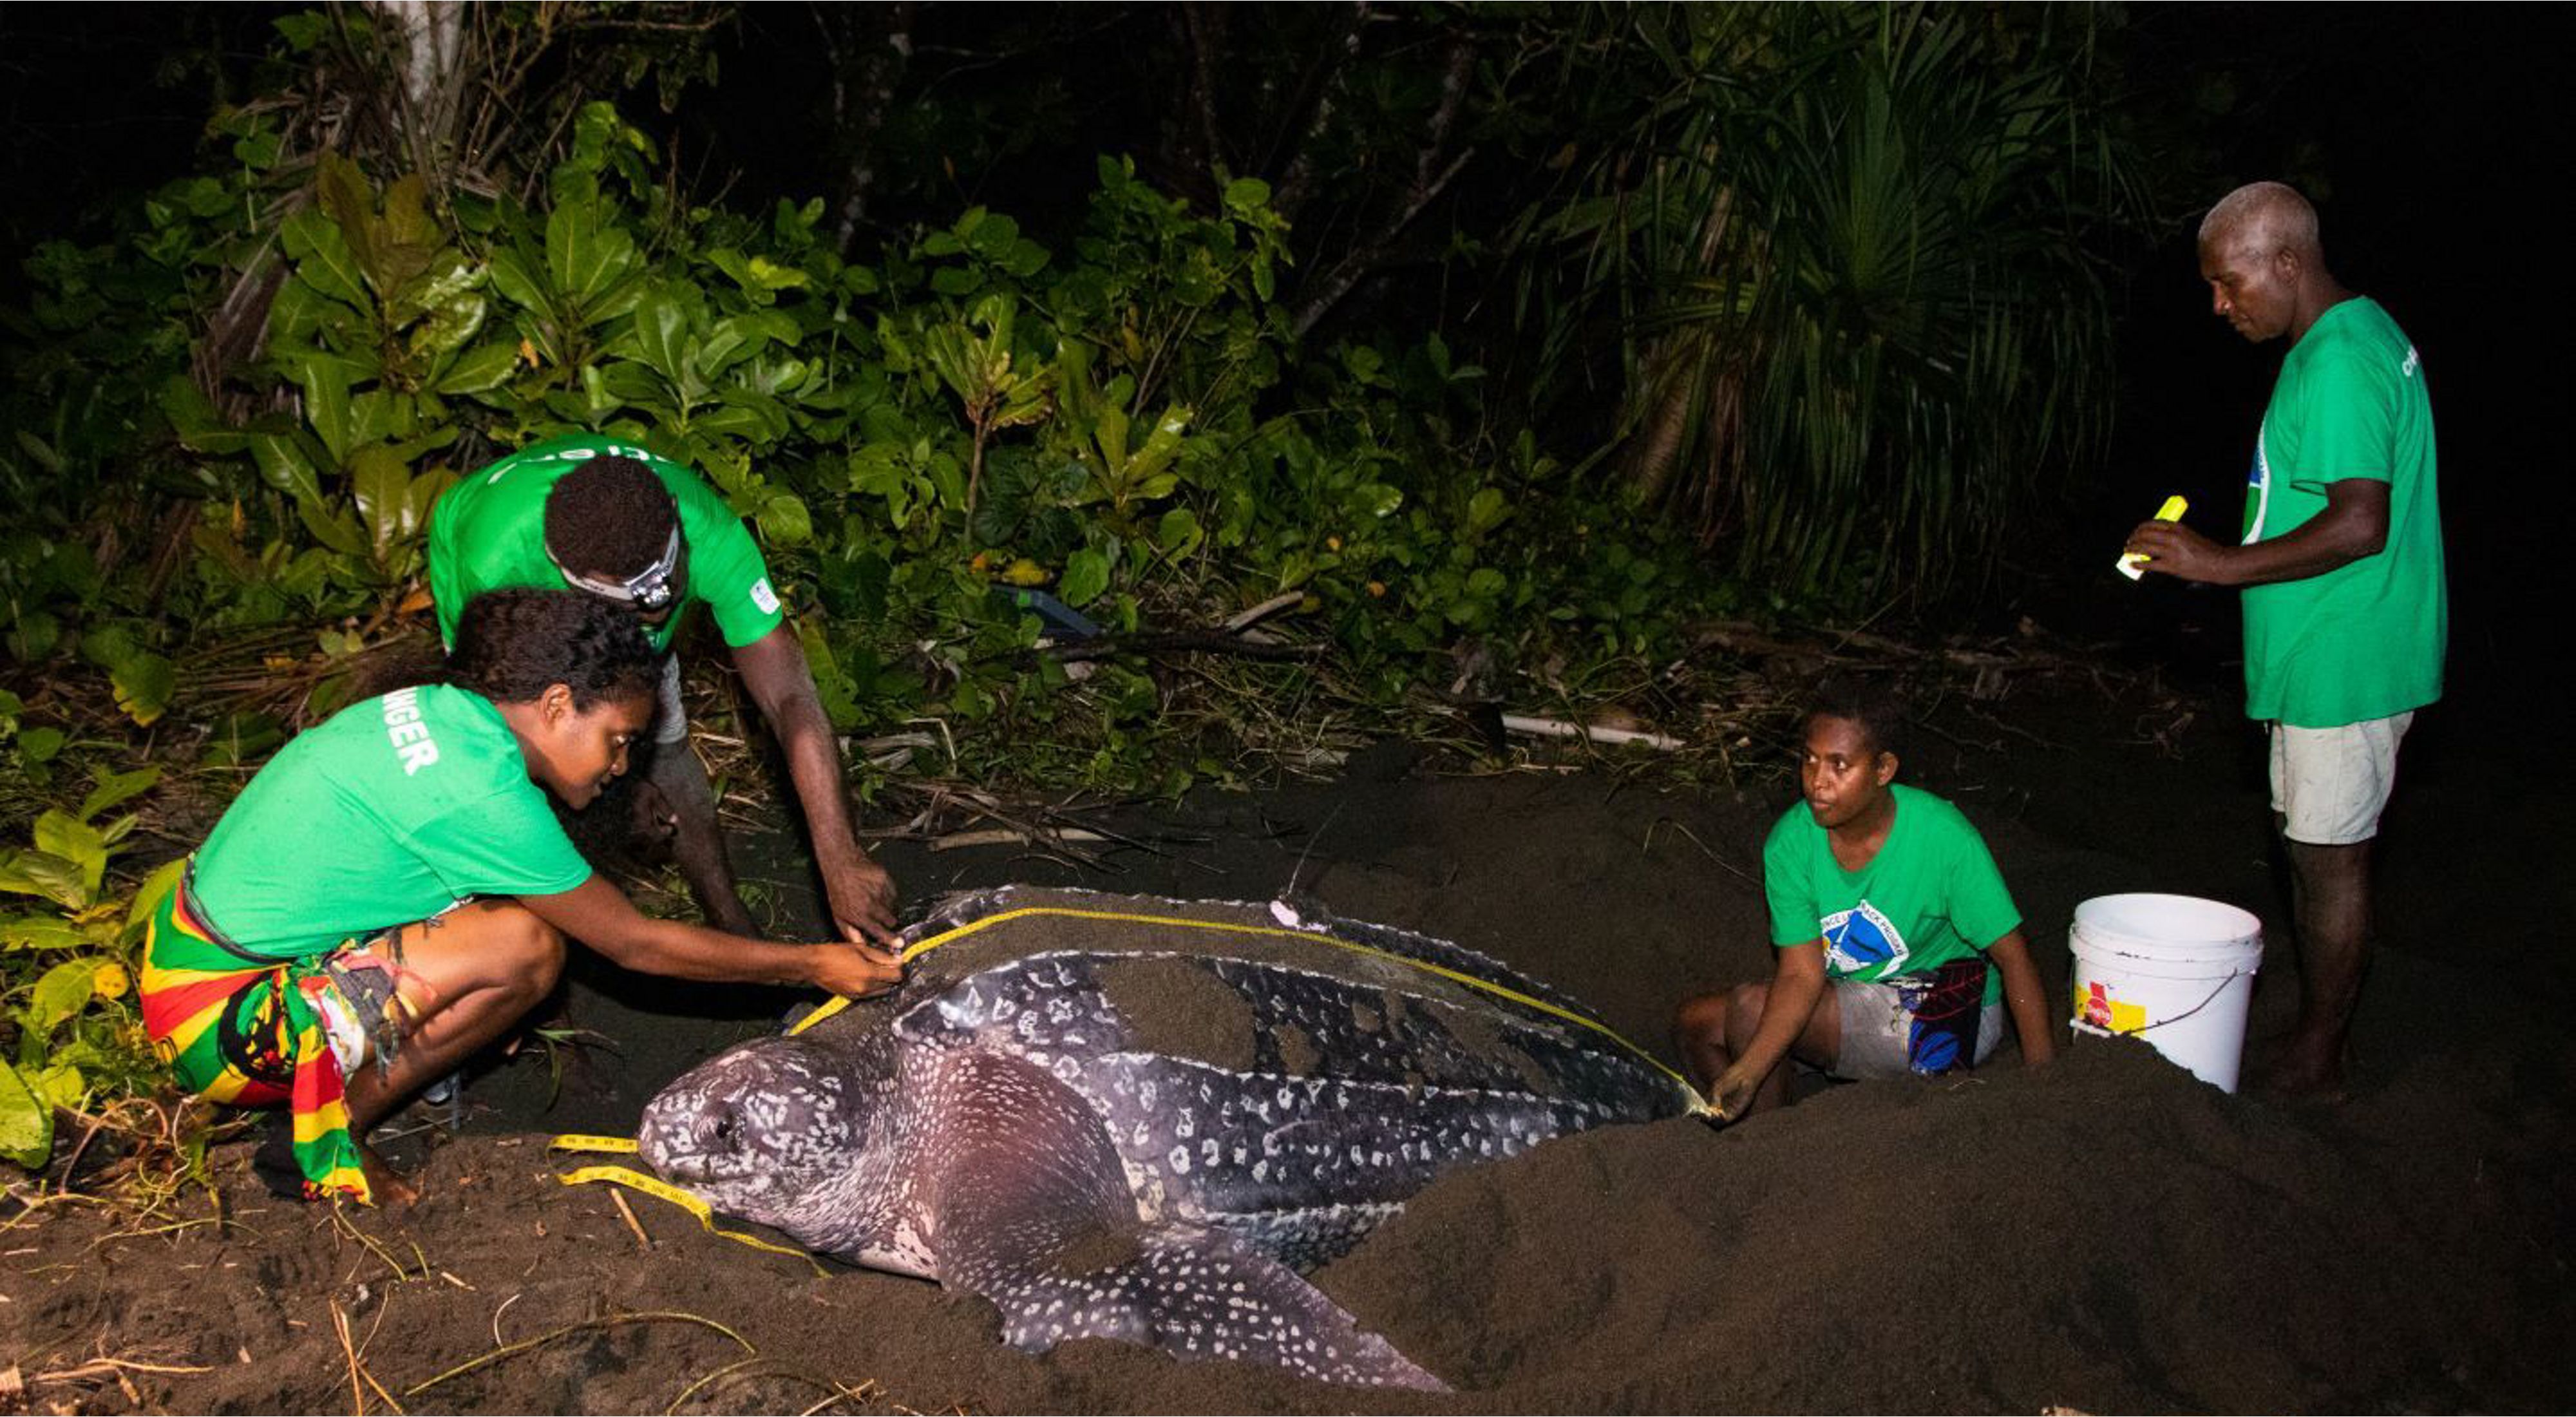 Rangers monitoring a leatherback turtle named Fari Kuti, which means "one nest together" locally, in Isabel Province of the Solomon Islands. 